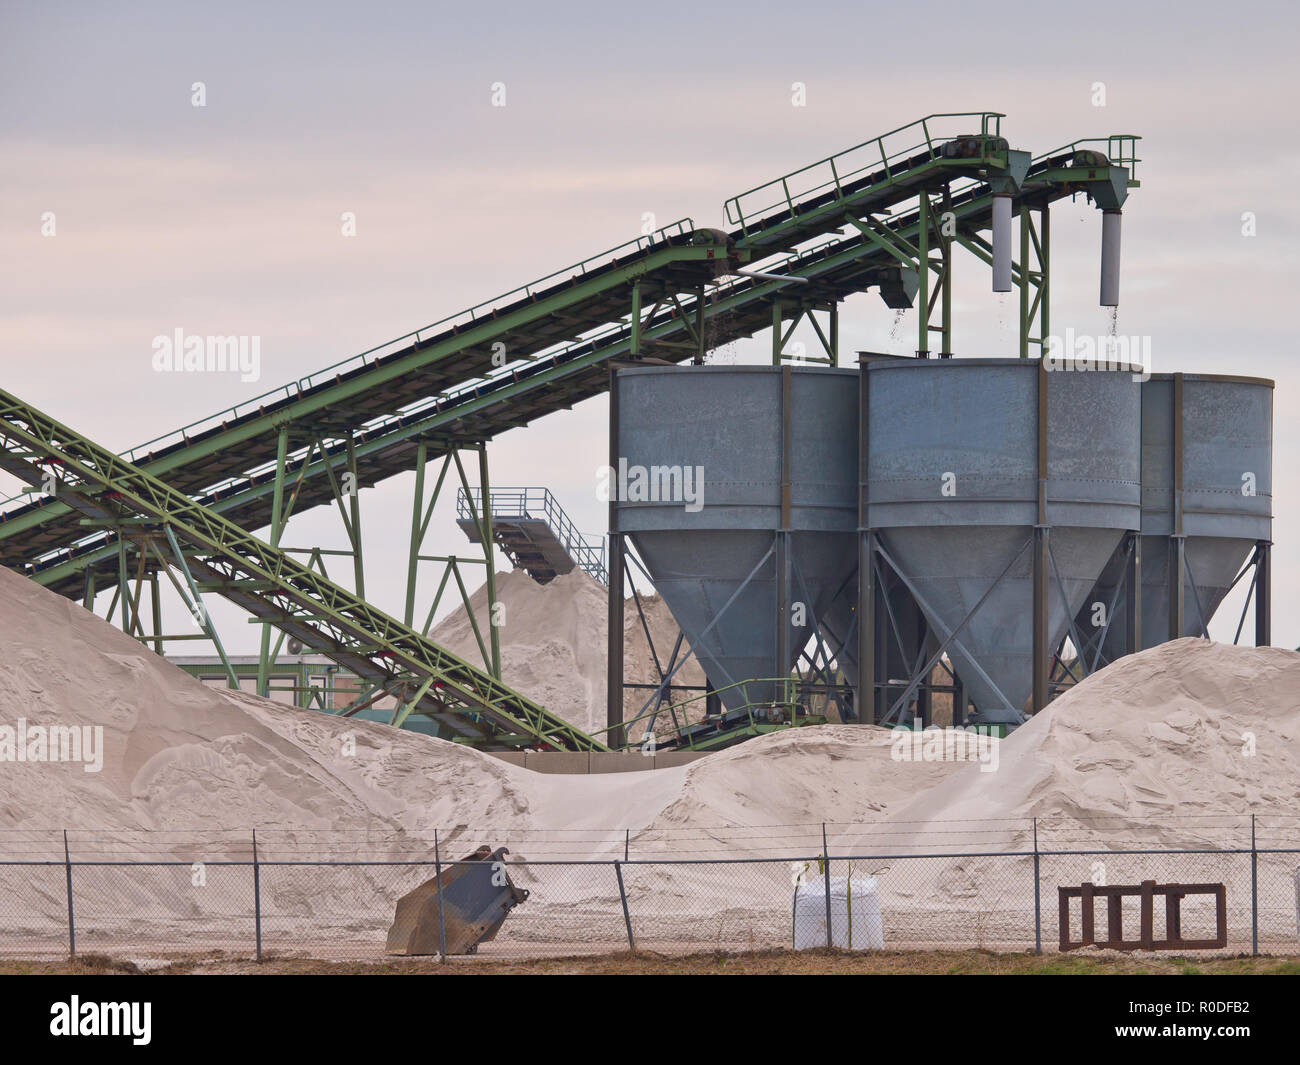 Mining belts are sorting sand Stock Photo